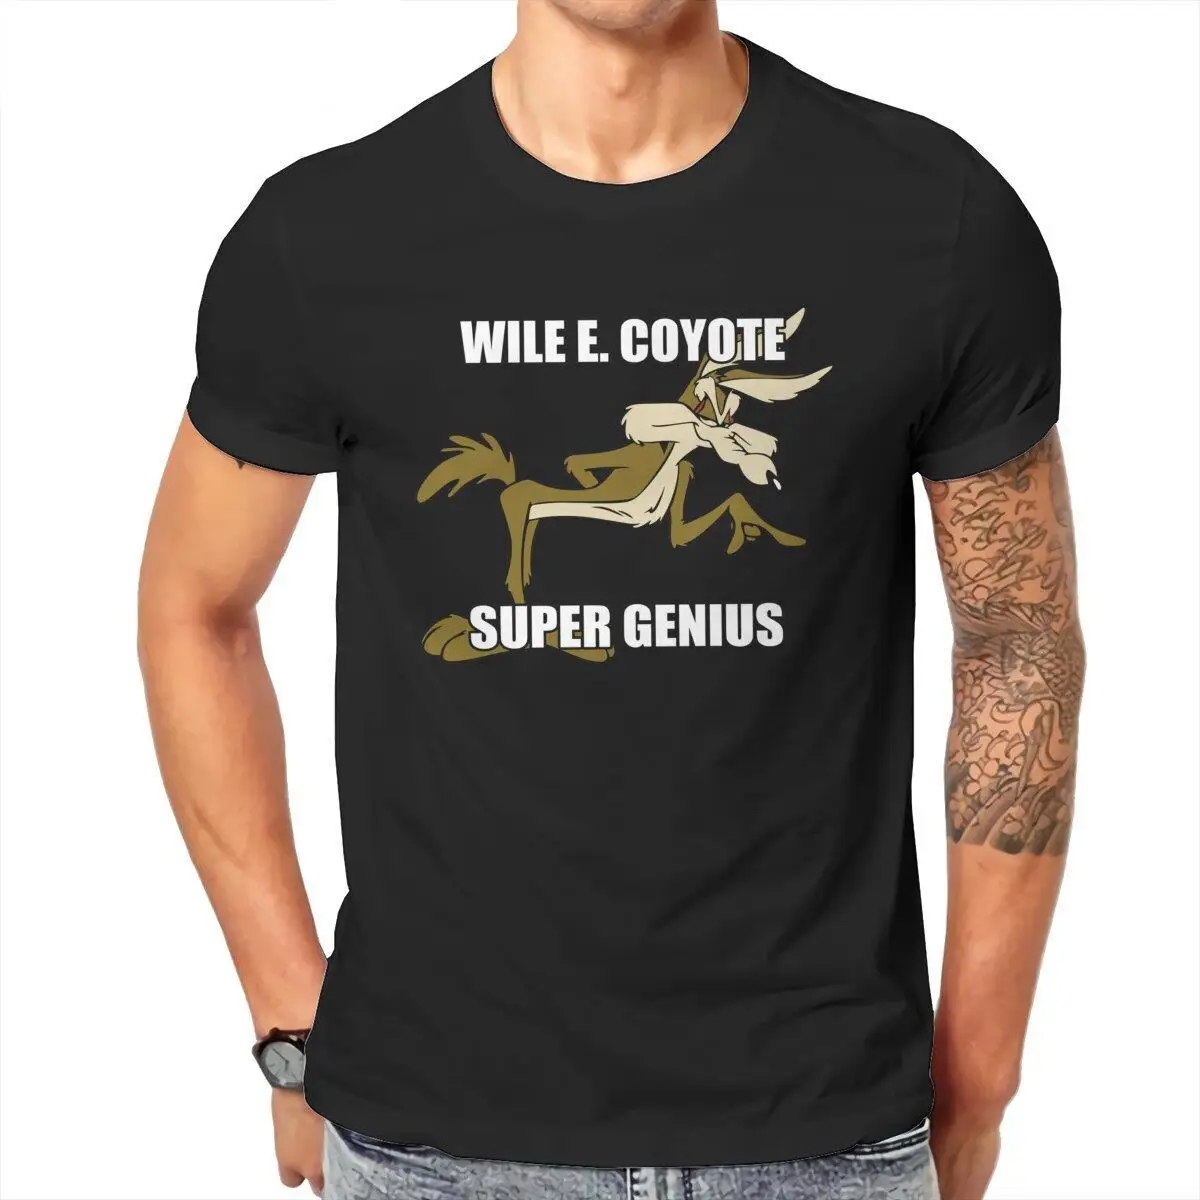 Vintage Funny Coyote Super Genius T-Shirt for Men O Neck 100% Cotton T Shirts  Short Sleeve Tees Summer Clothes